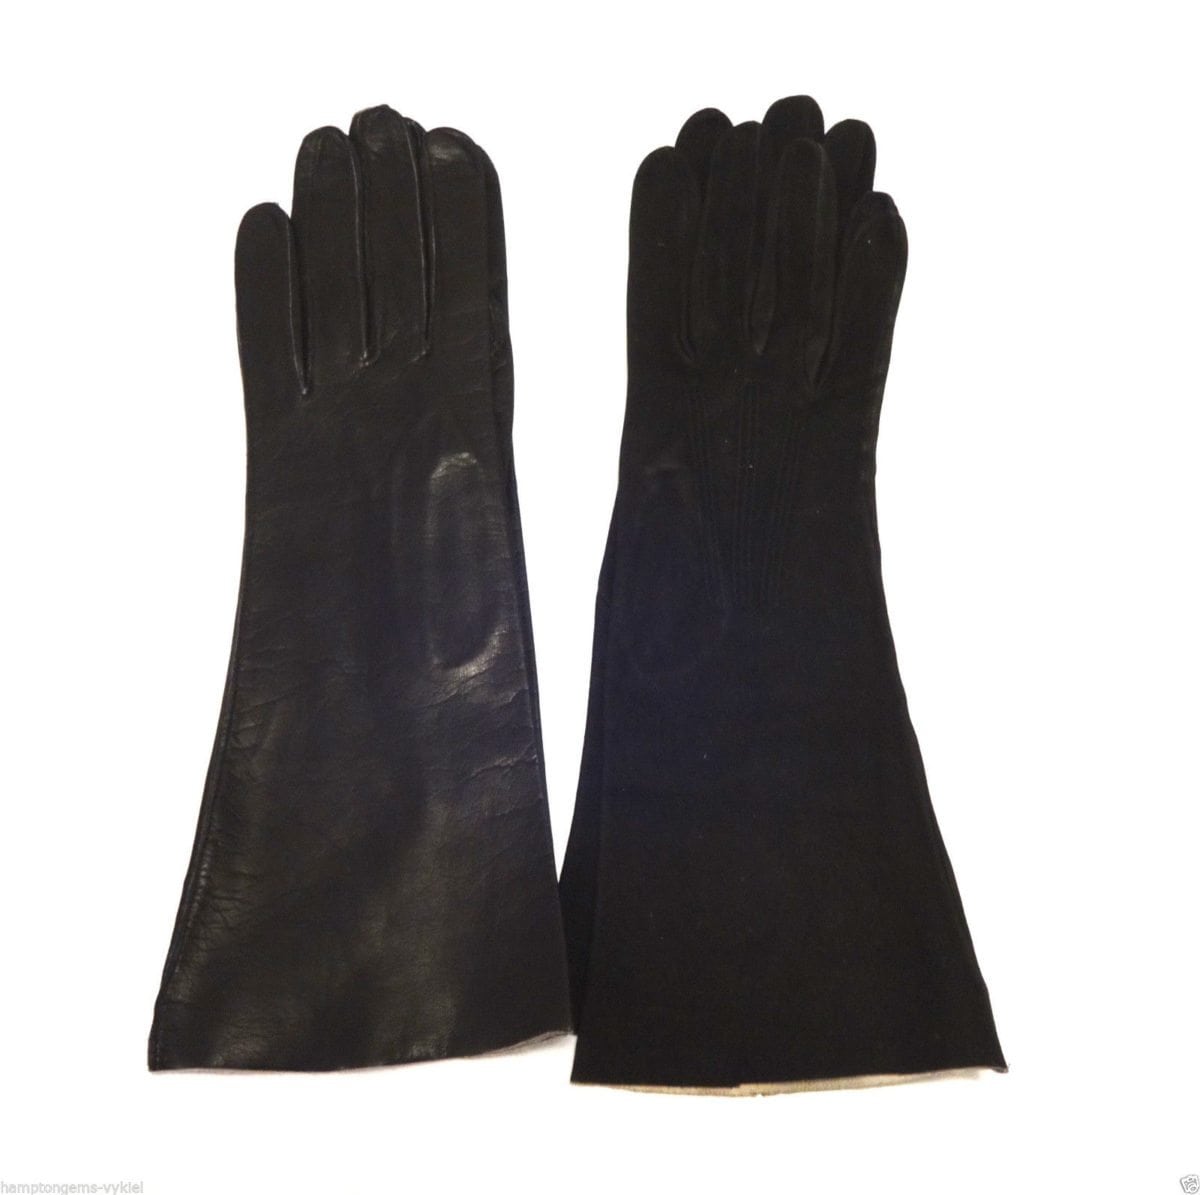 2PCS-FRENCH LONG GLOVES, BLACK LEATHER BLACK SUEDE- SIZE-6 3/4 NEW ...